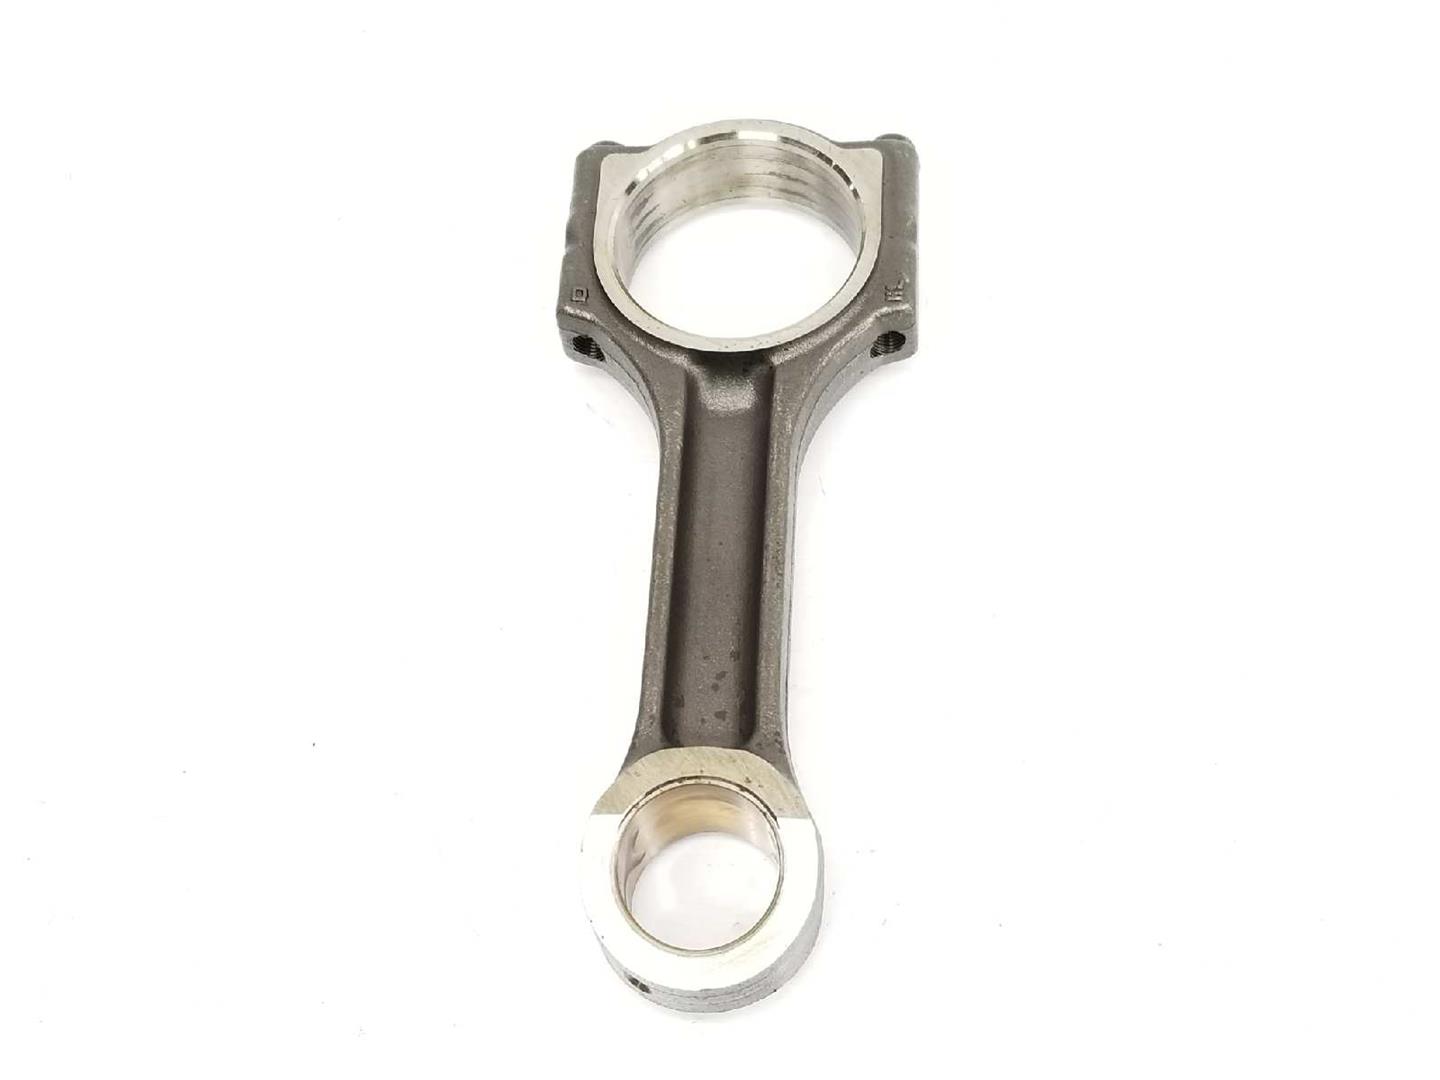 RENAULT Espace 4 generation (2002-2014) Connecting Rod 7701472847, 7701472847, SOLOUNA 19732726